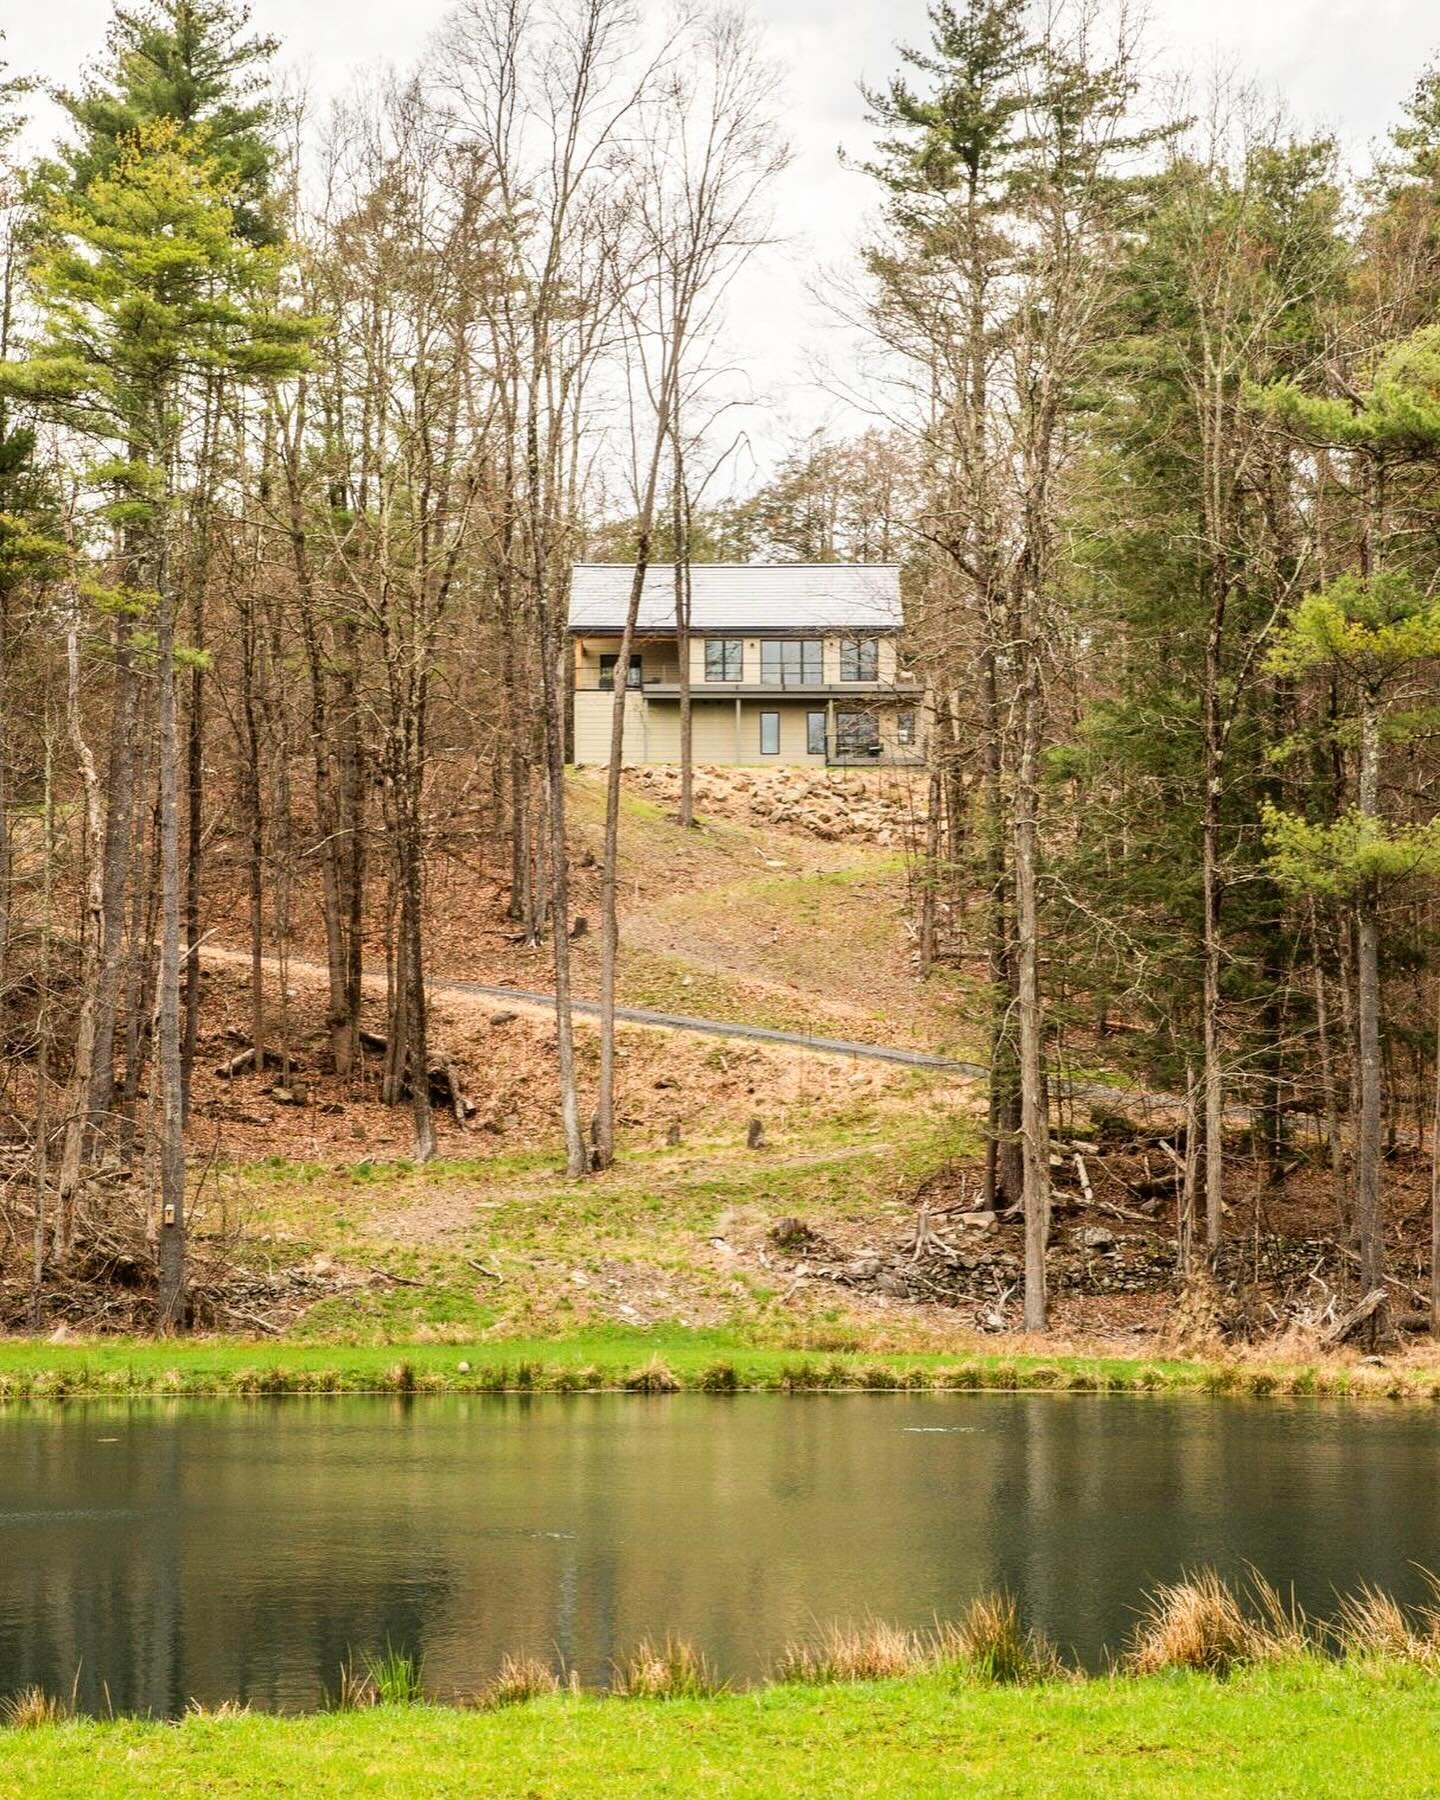 Welcome to Lakeview Hideaway

An Exclusive New Listing by @ThisOldHudson

Discover a harmonious blend of luxury and sustainability at Lakeview Hideaway. At the end of a long private driveway, this certified green-build home features a meticulously cr